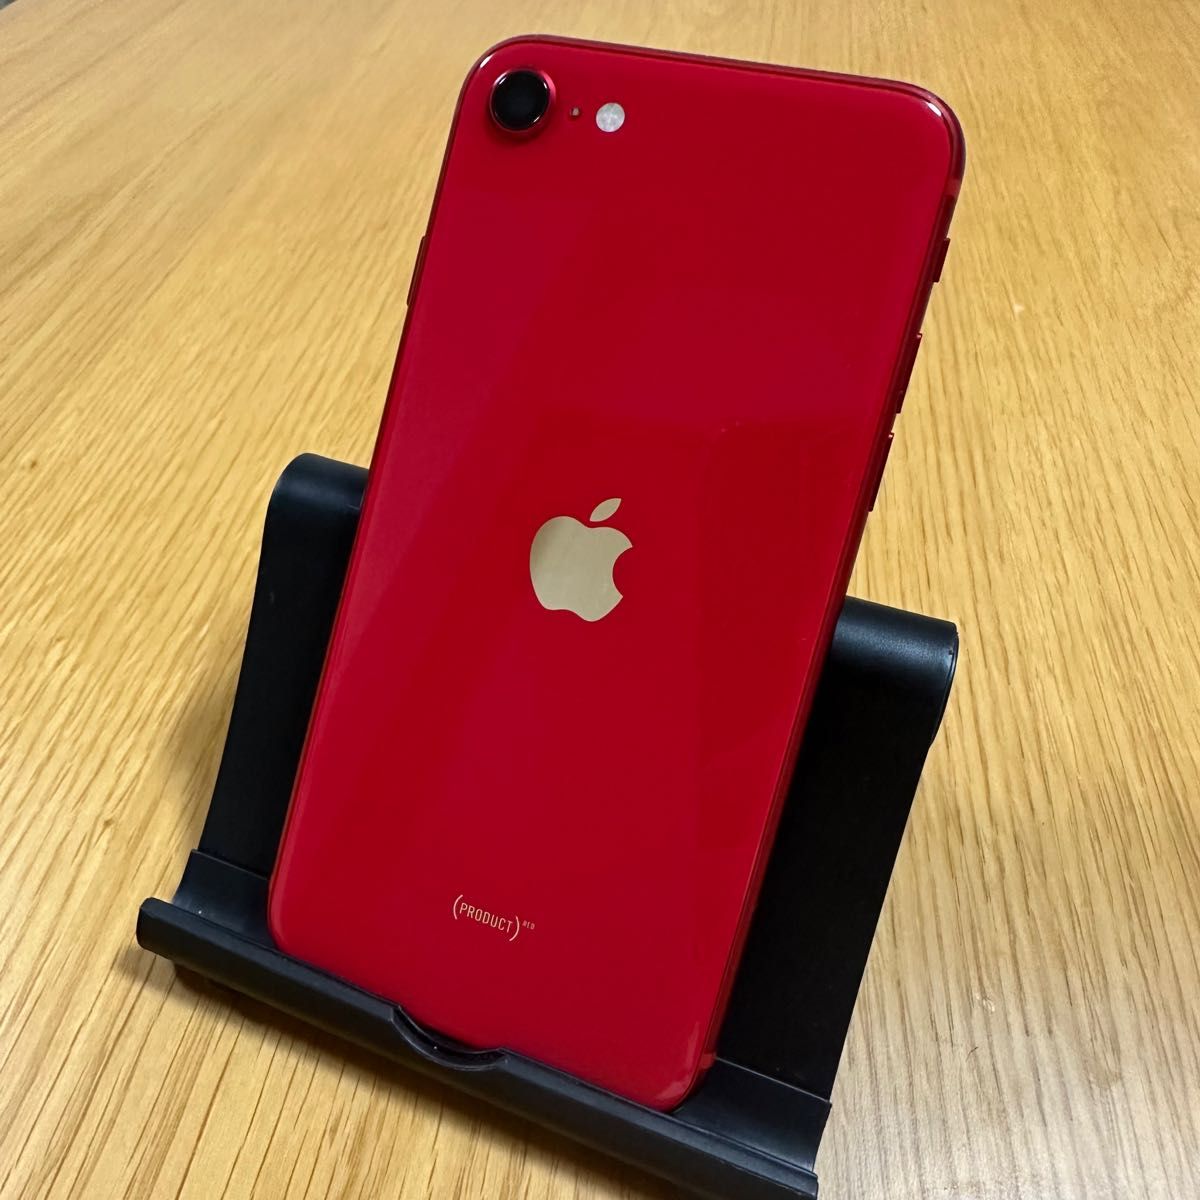 iPhone8 64GB PRODUCT RED 81% docomo 【管理番号135】｜PayPayフリマ